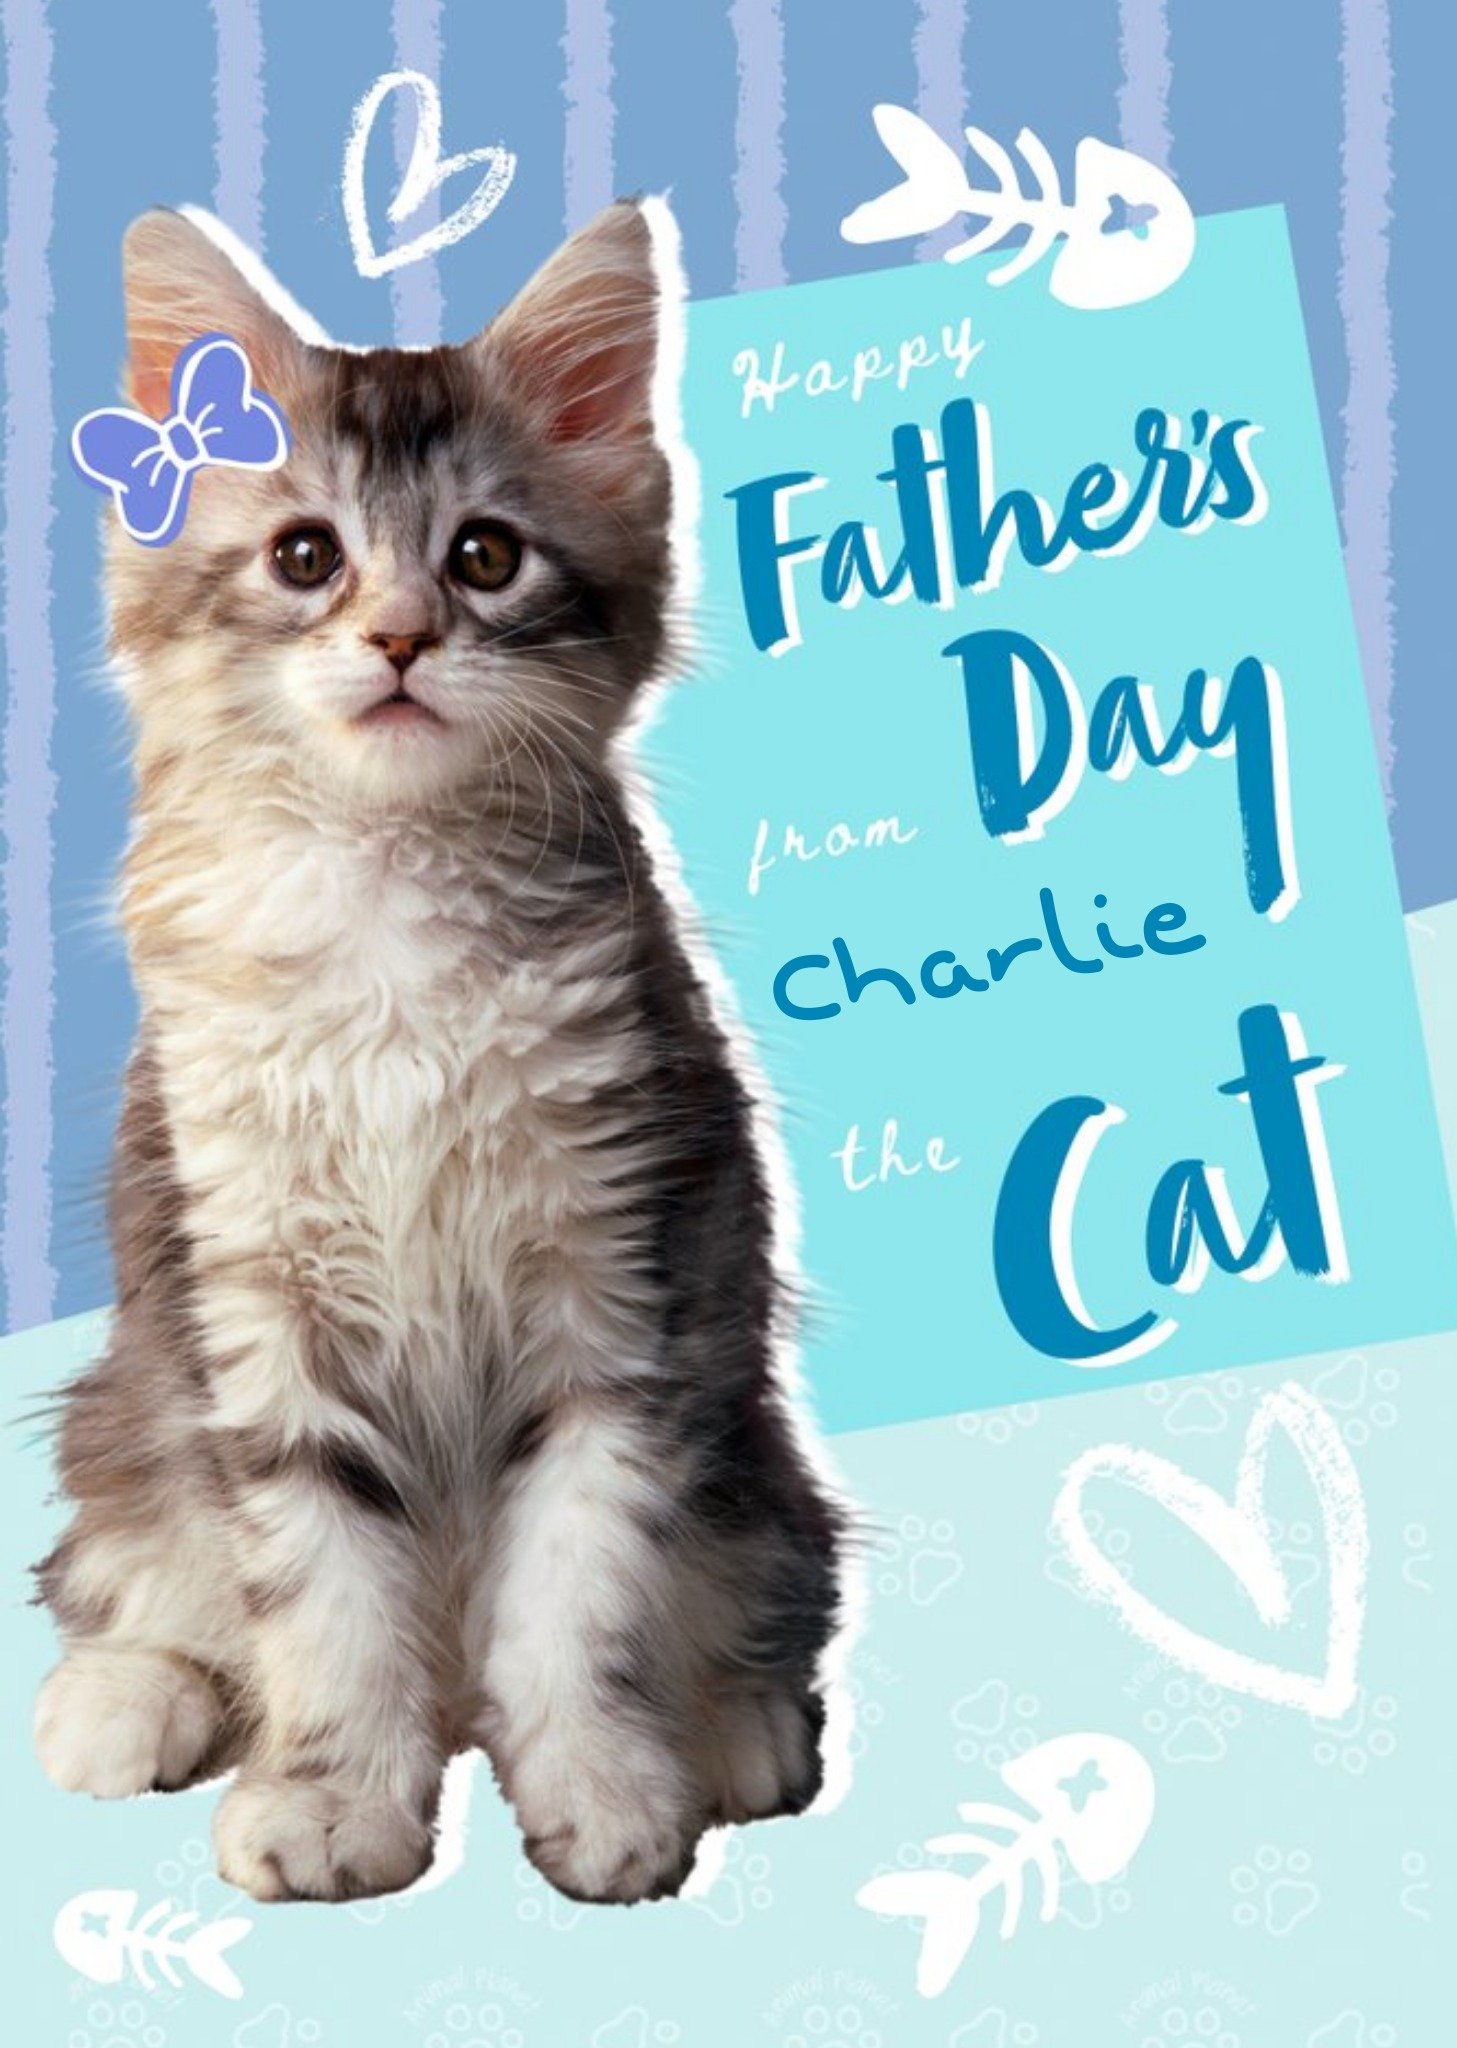 Moonpig Animal Planet Cute From The Cat Father's Day Card Ecard